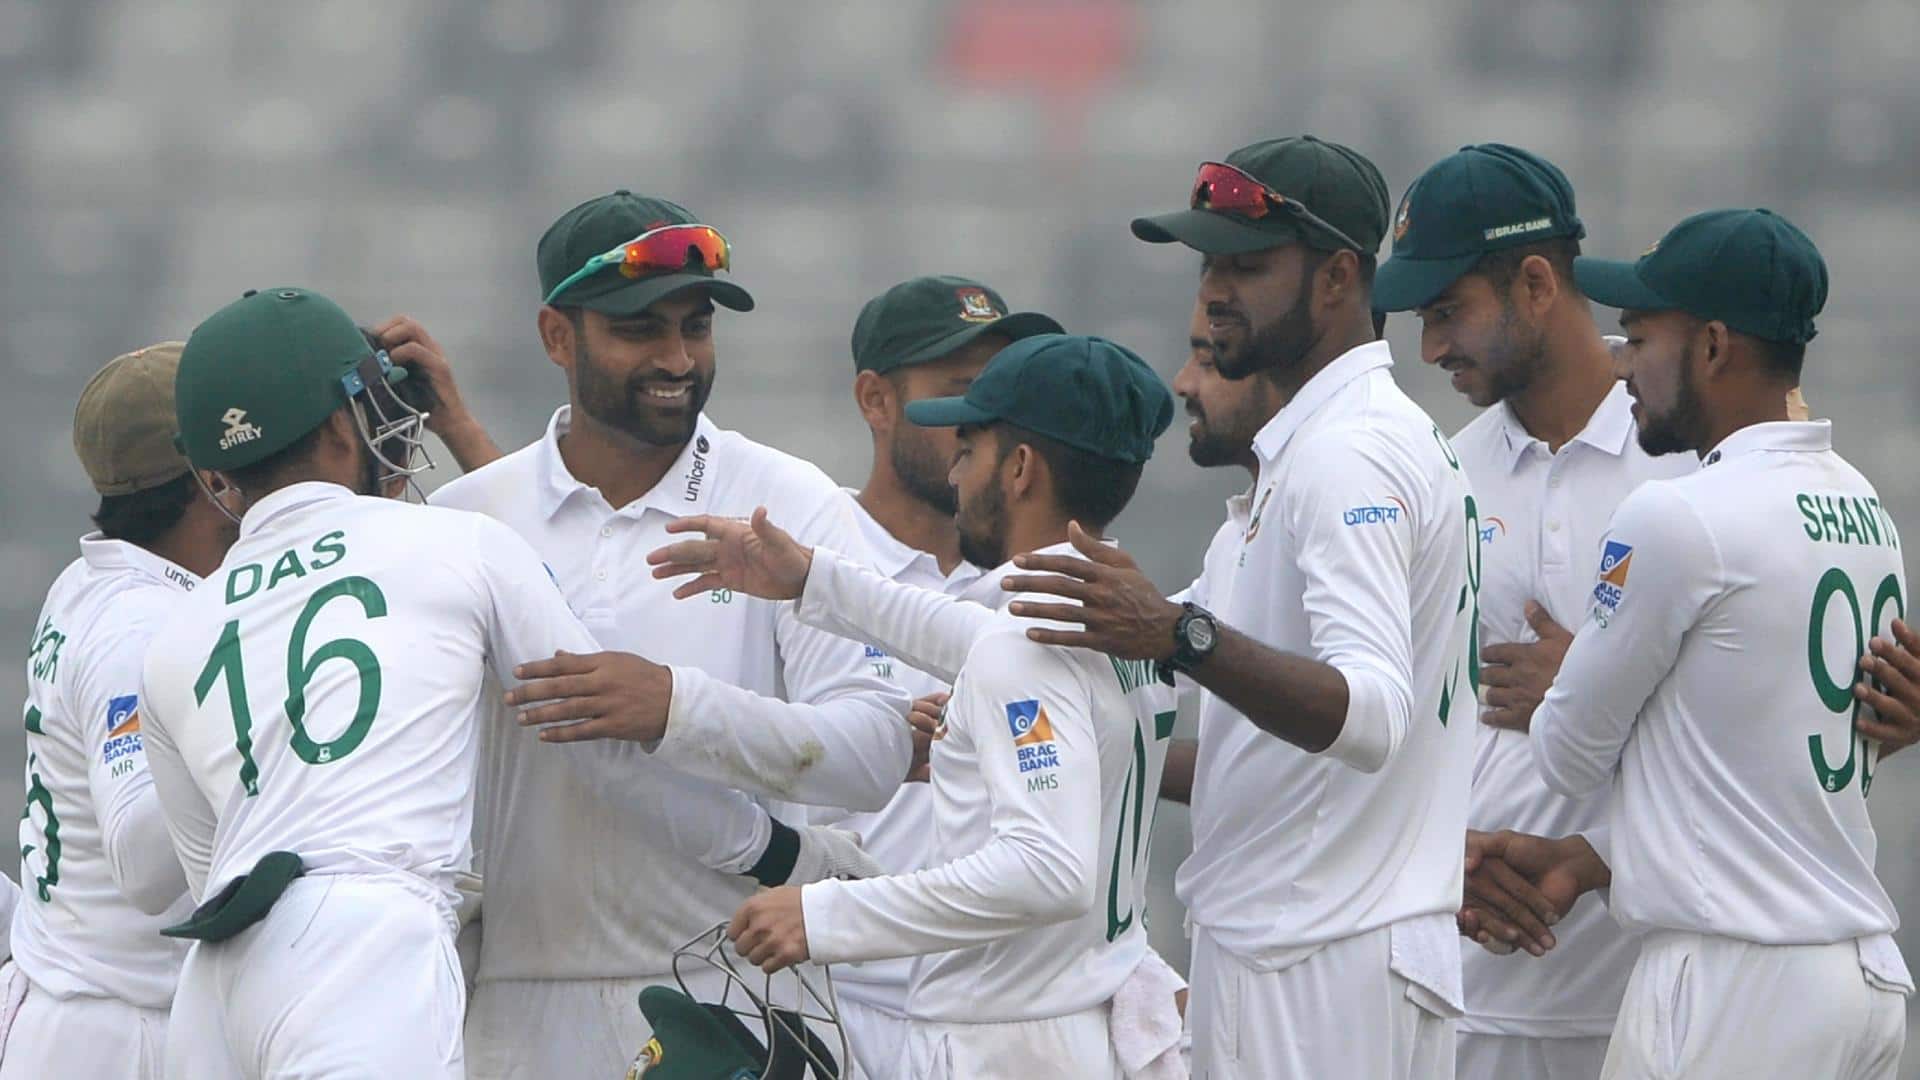 Bangladesh vs Afghanistan, one-off Test: Statistical preview